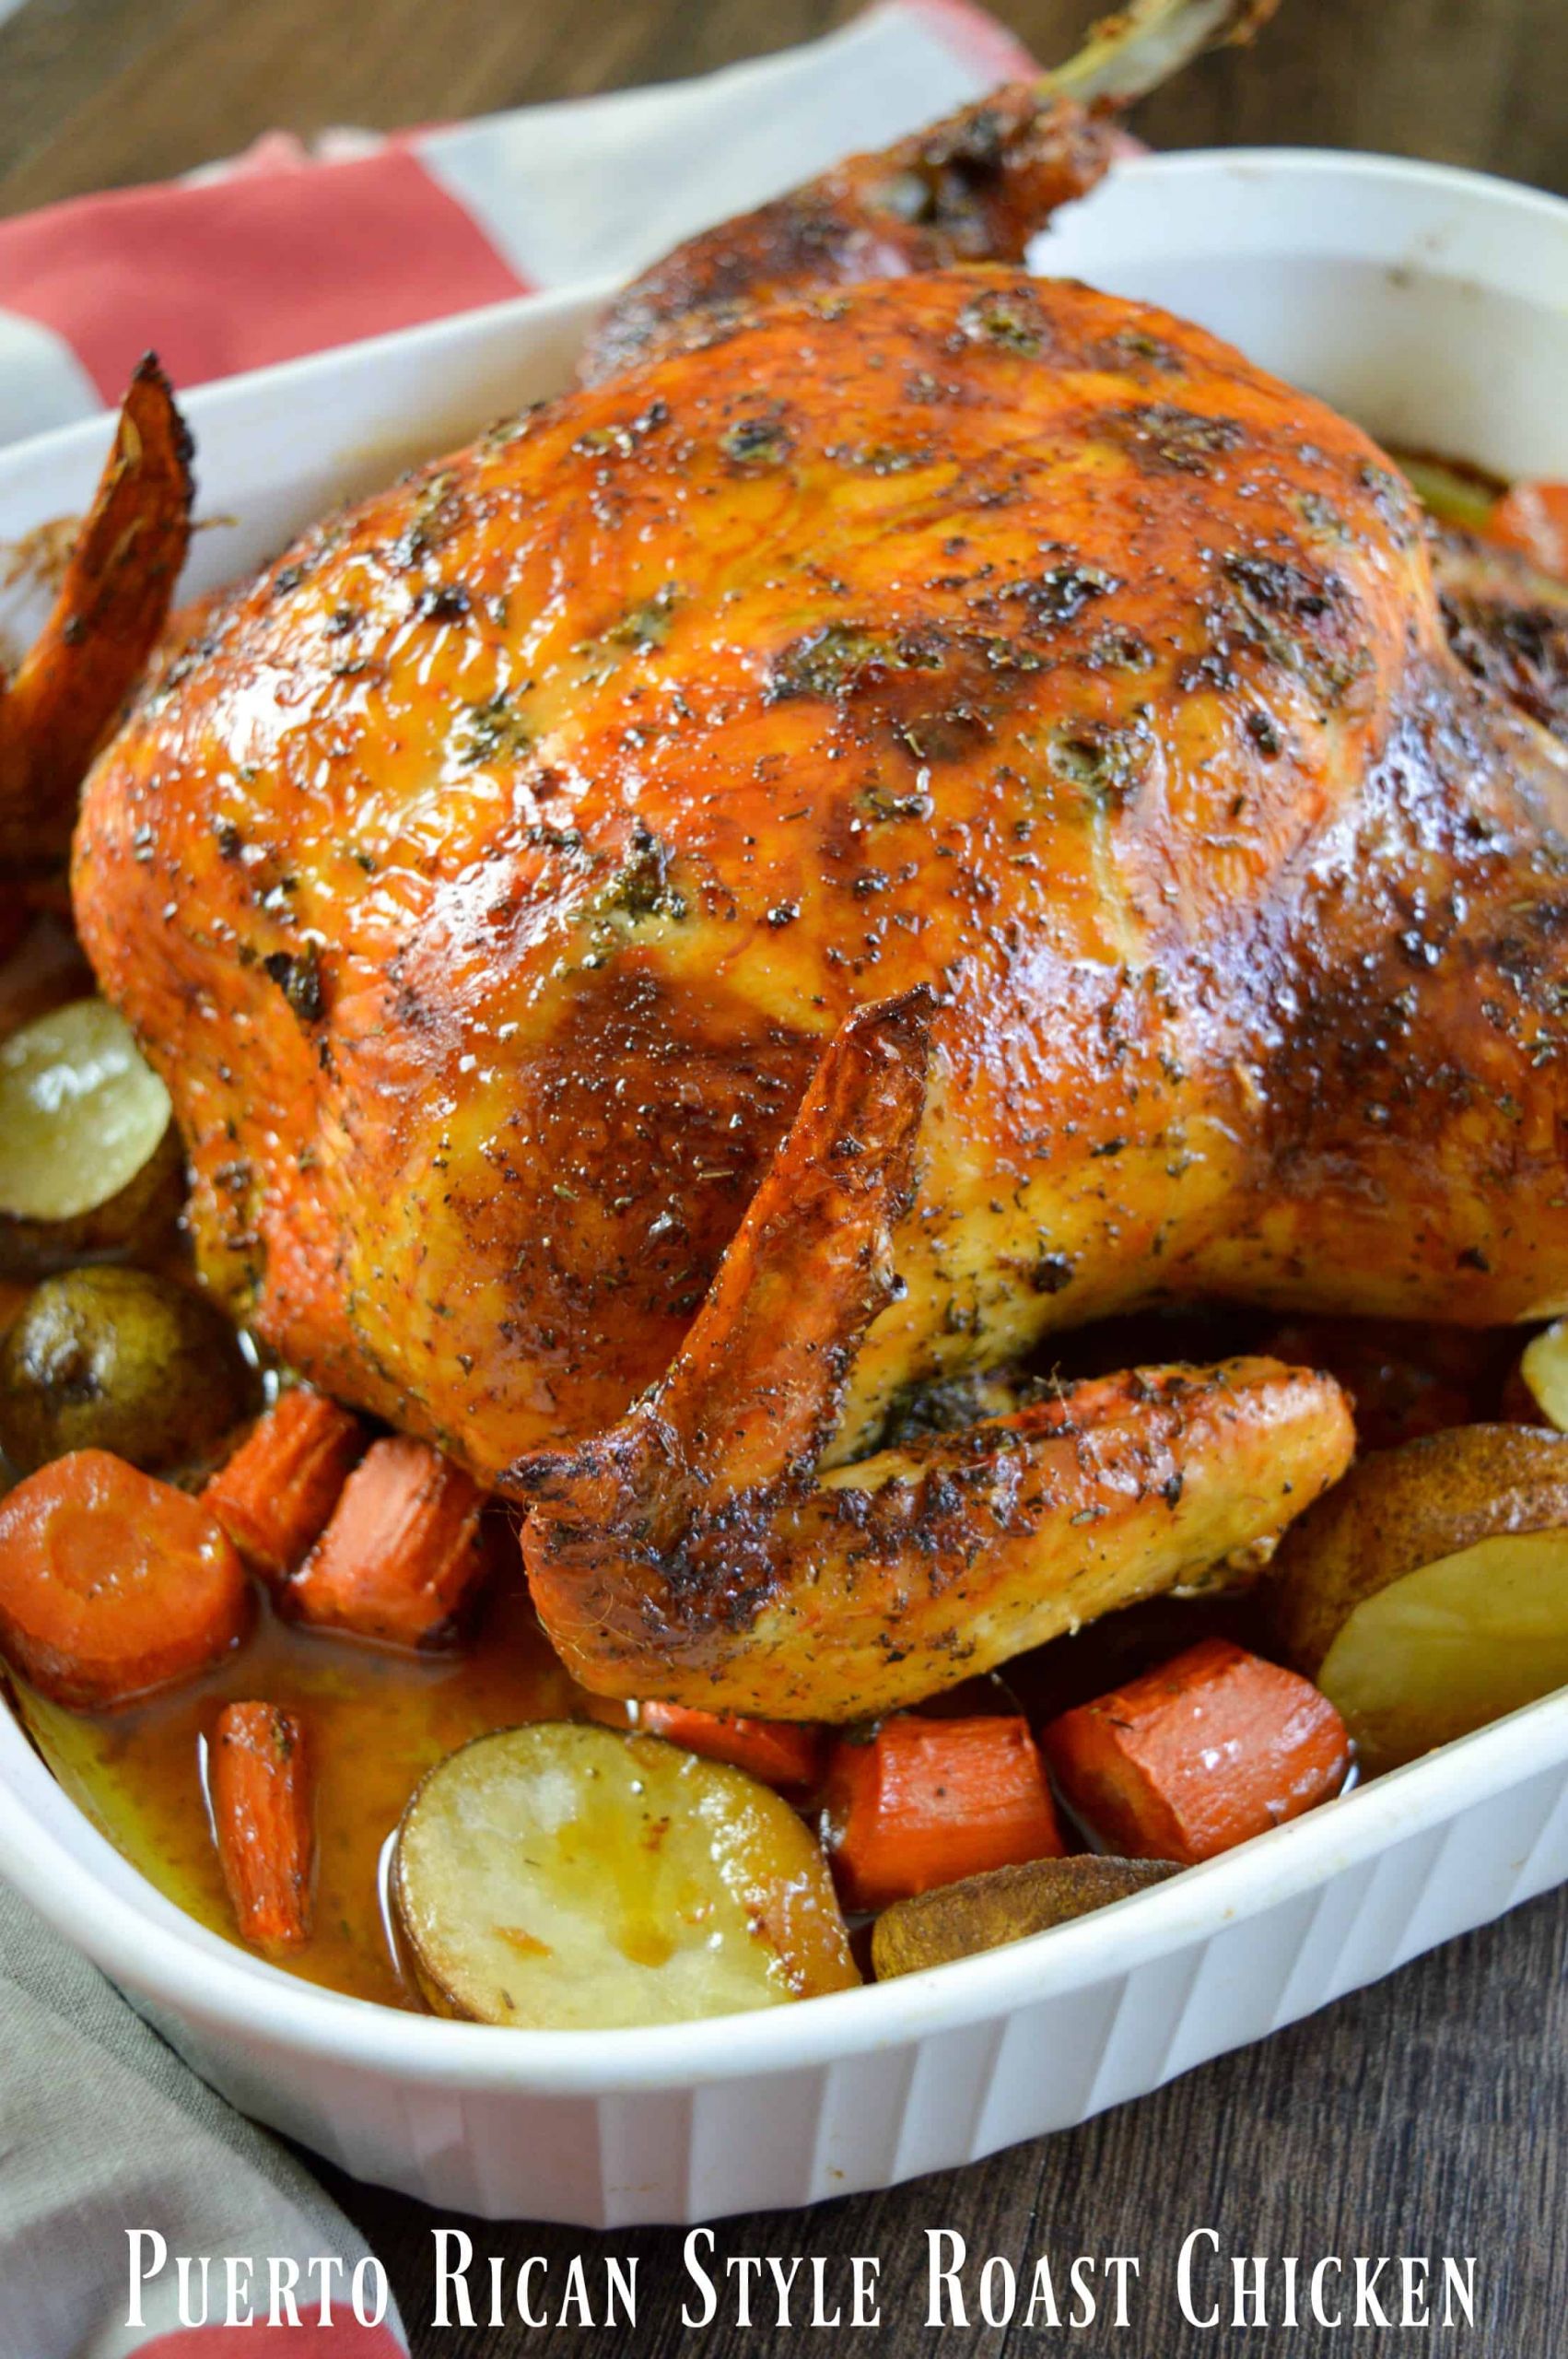 Puerto Rican Baked Chicken Beautiful Puerto Rican Style whole Roasted Chicken Recipe